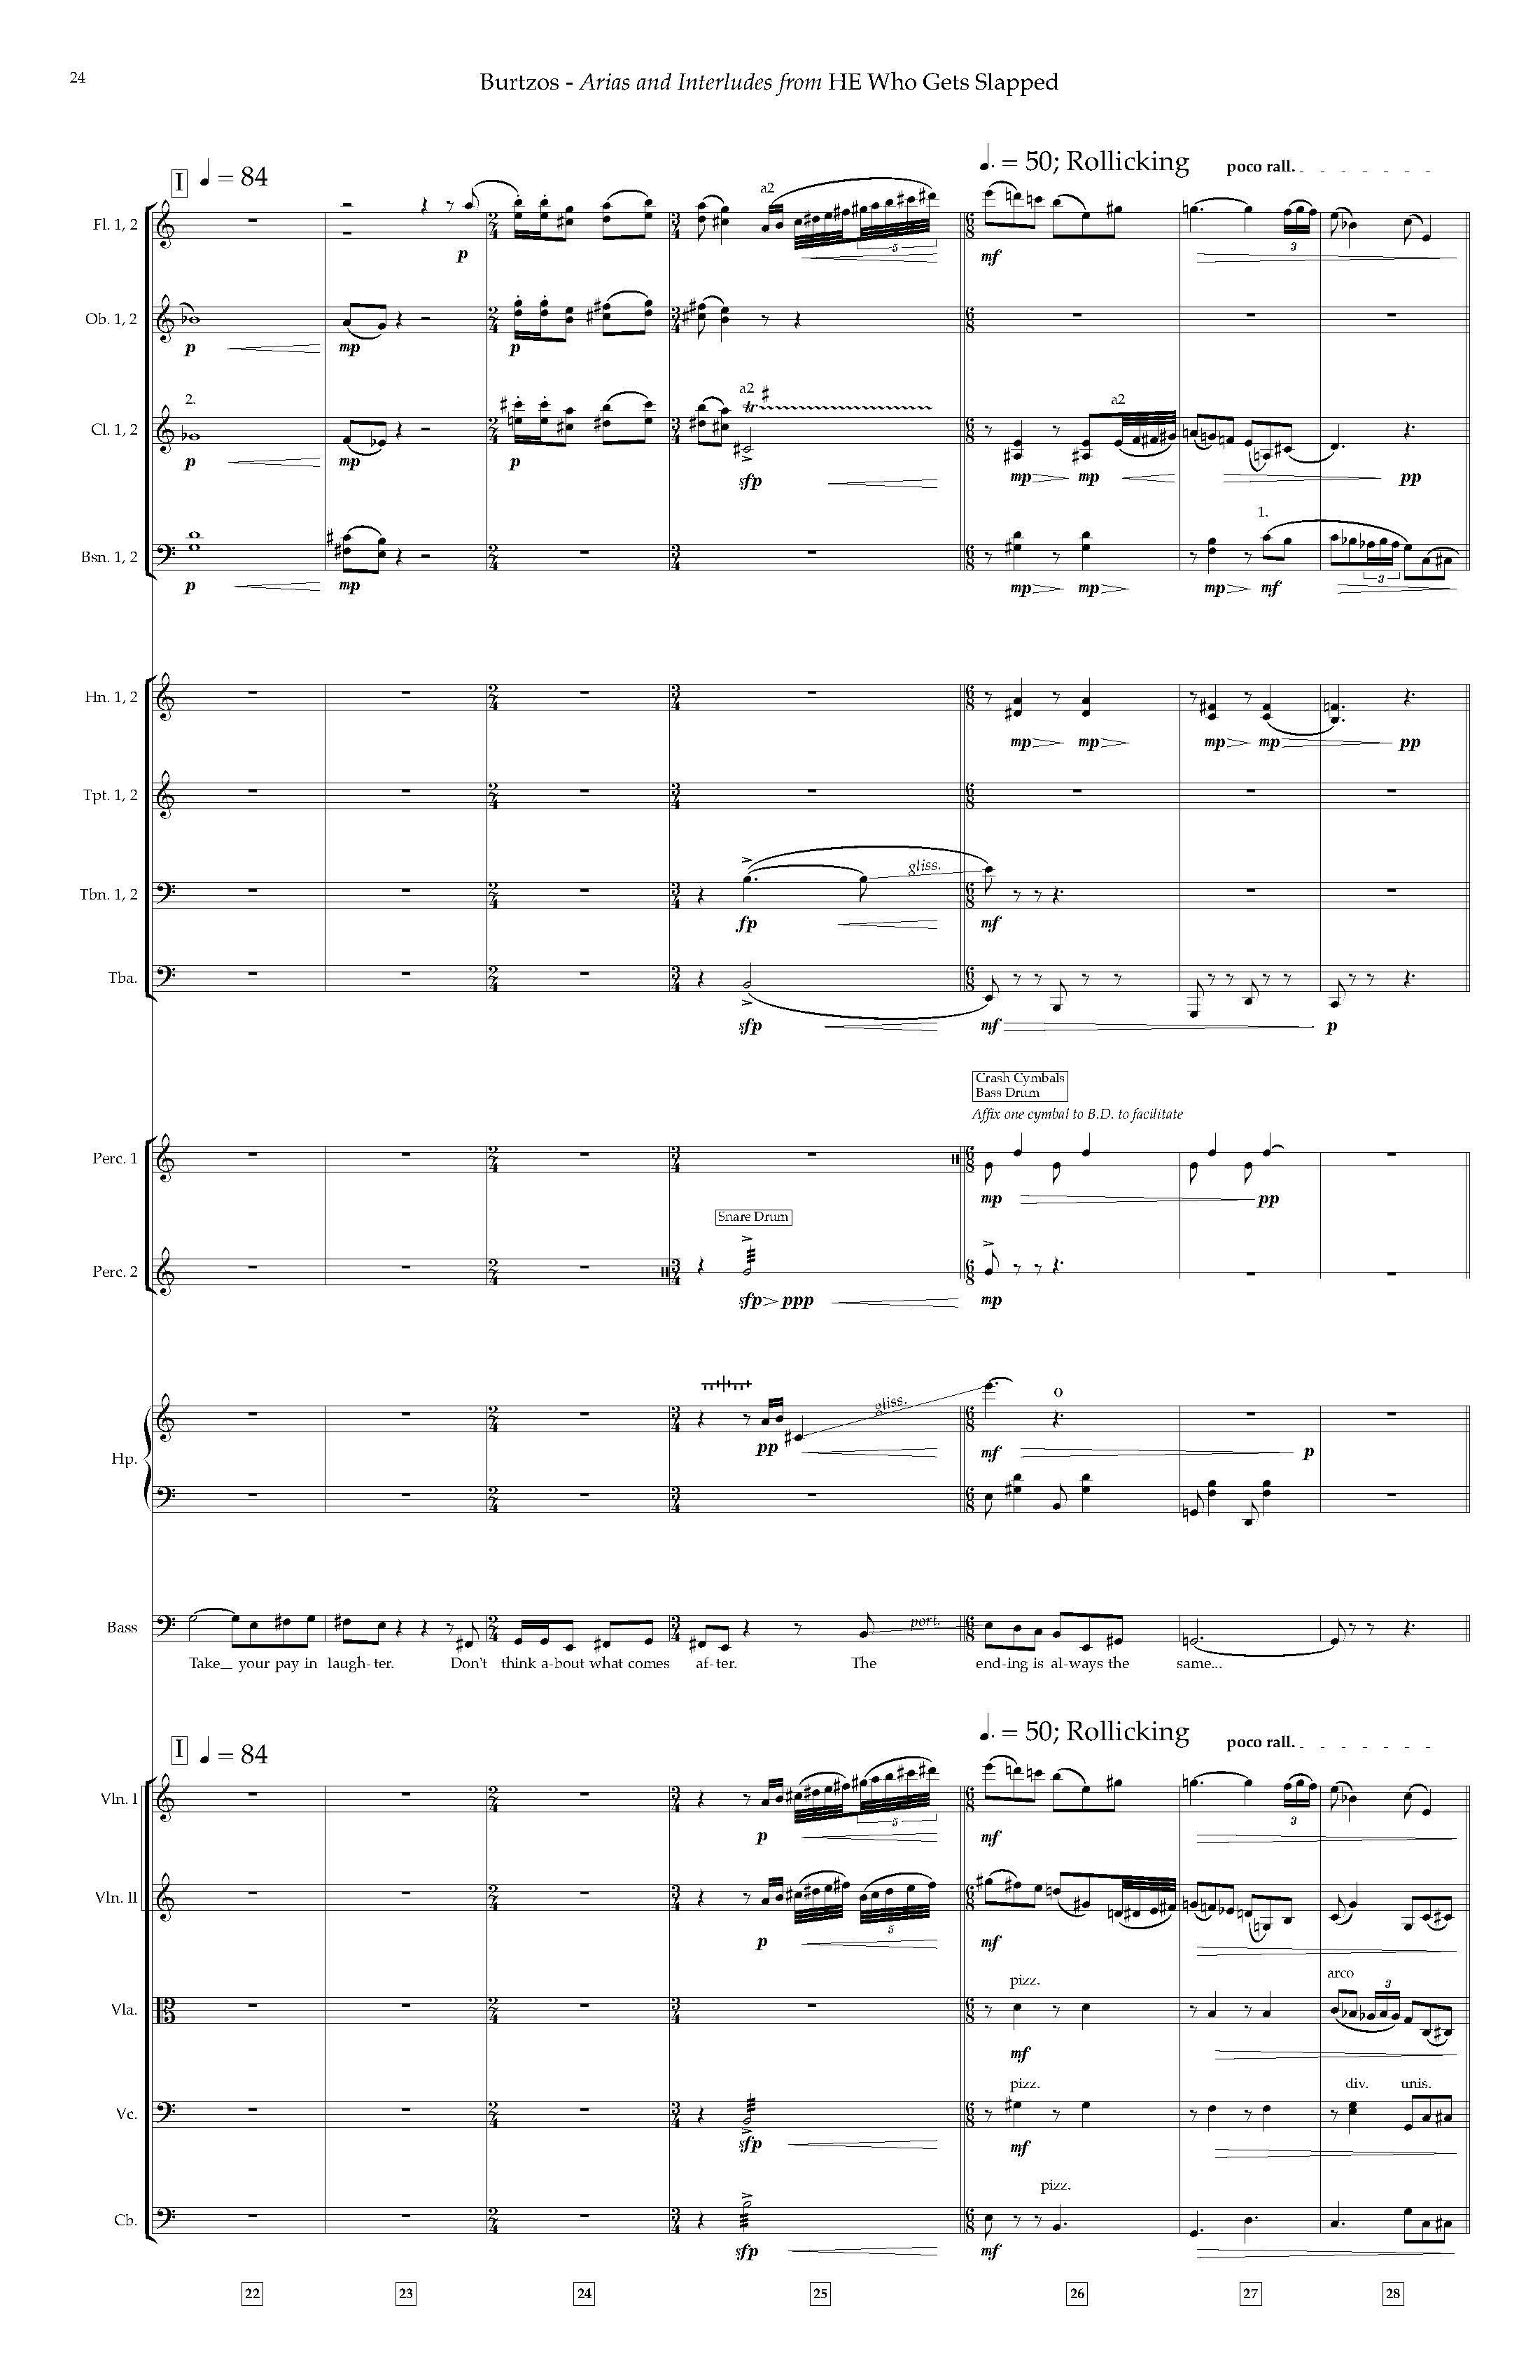 Arias and Interludes from HWGS - Complete Score_Page_30.jpg